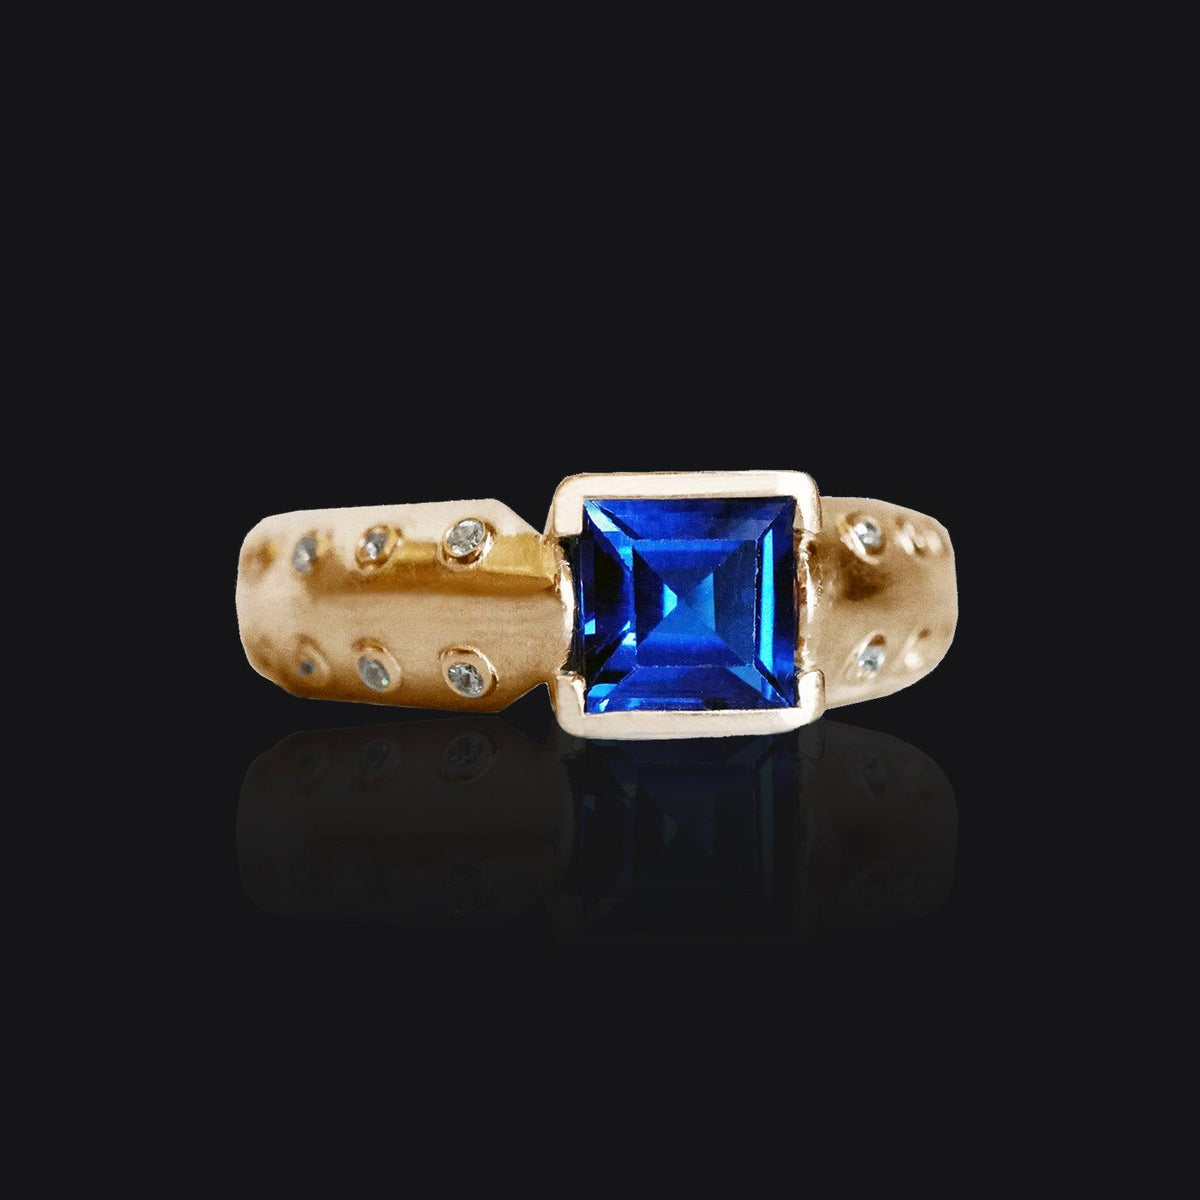 Paragon Blue Sapphire Diamond Ring in Sterling Silver and 14K Gold, 6mm